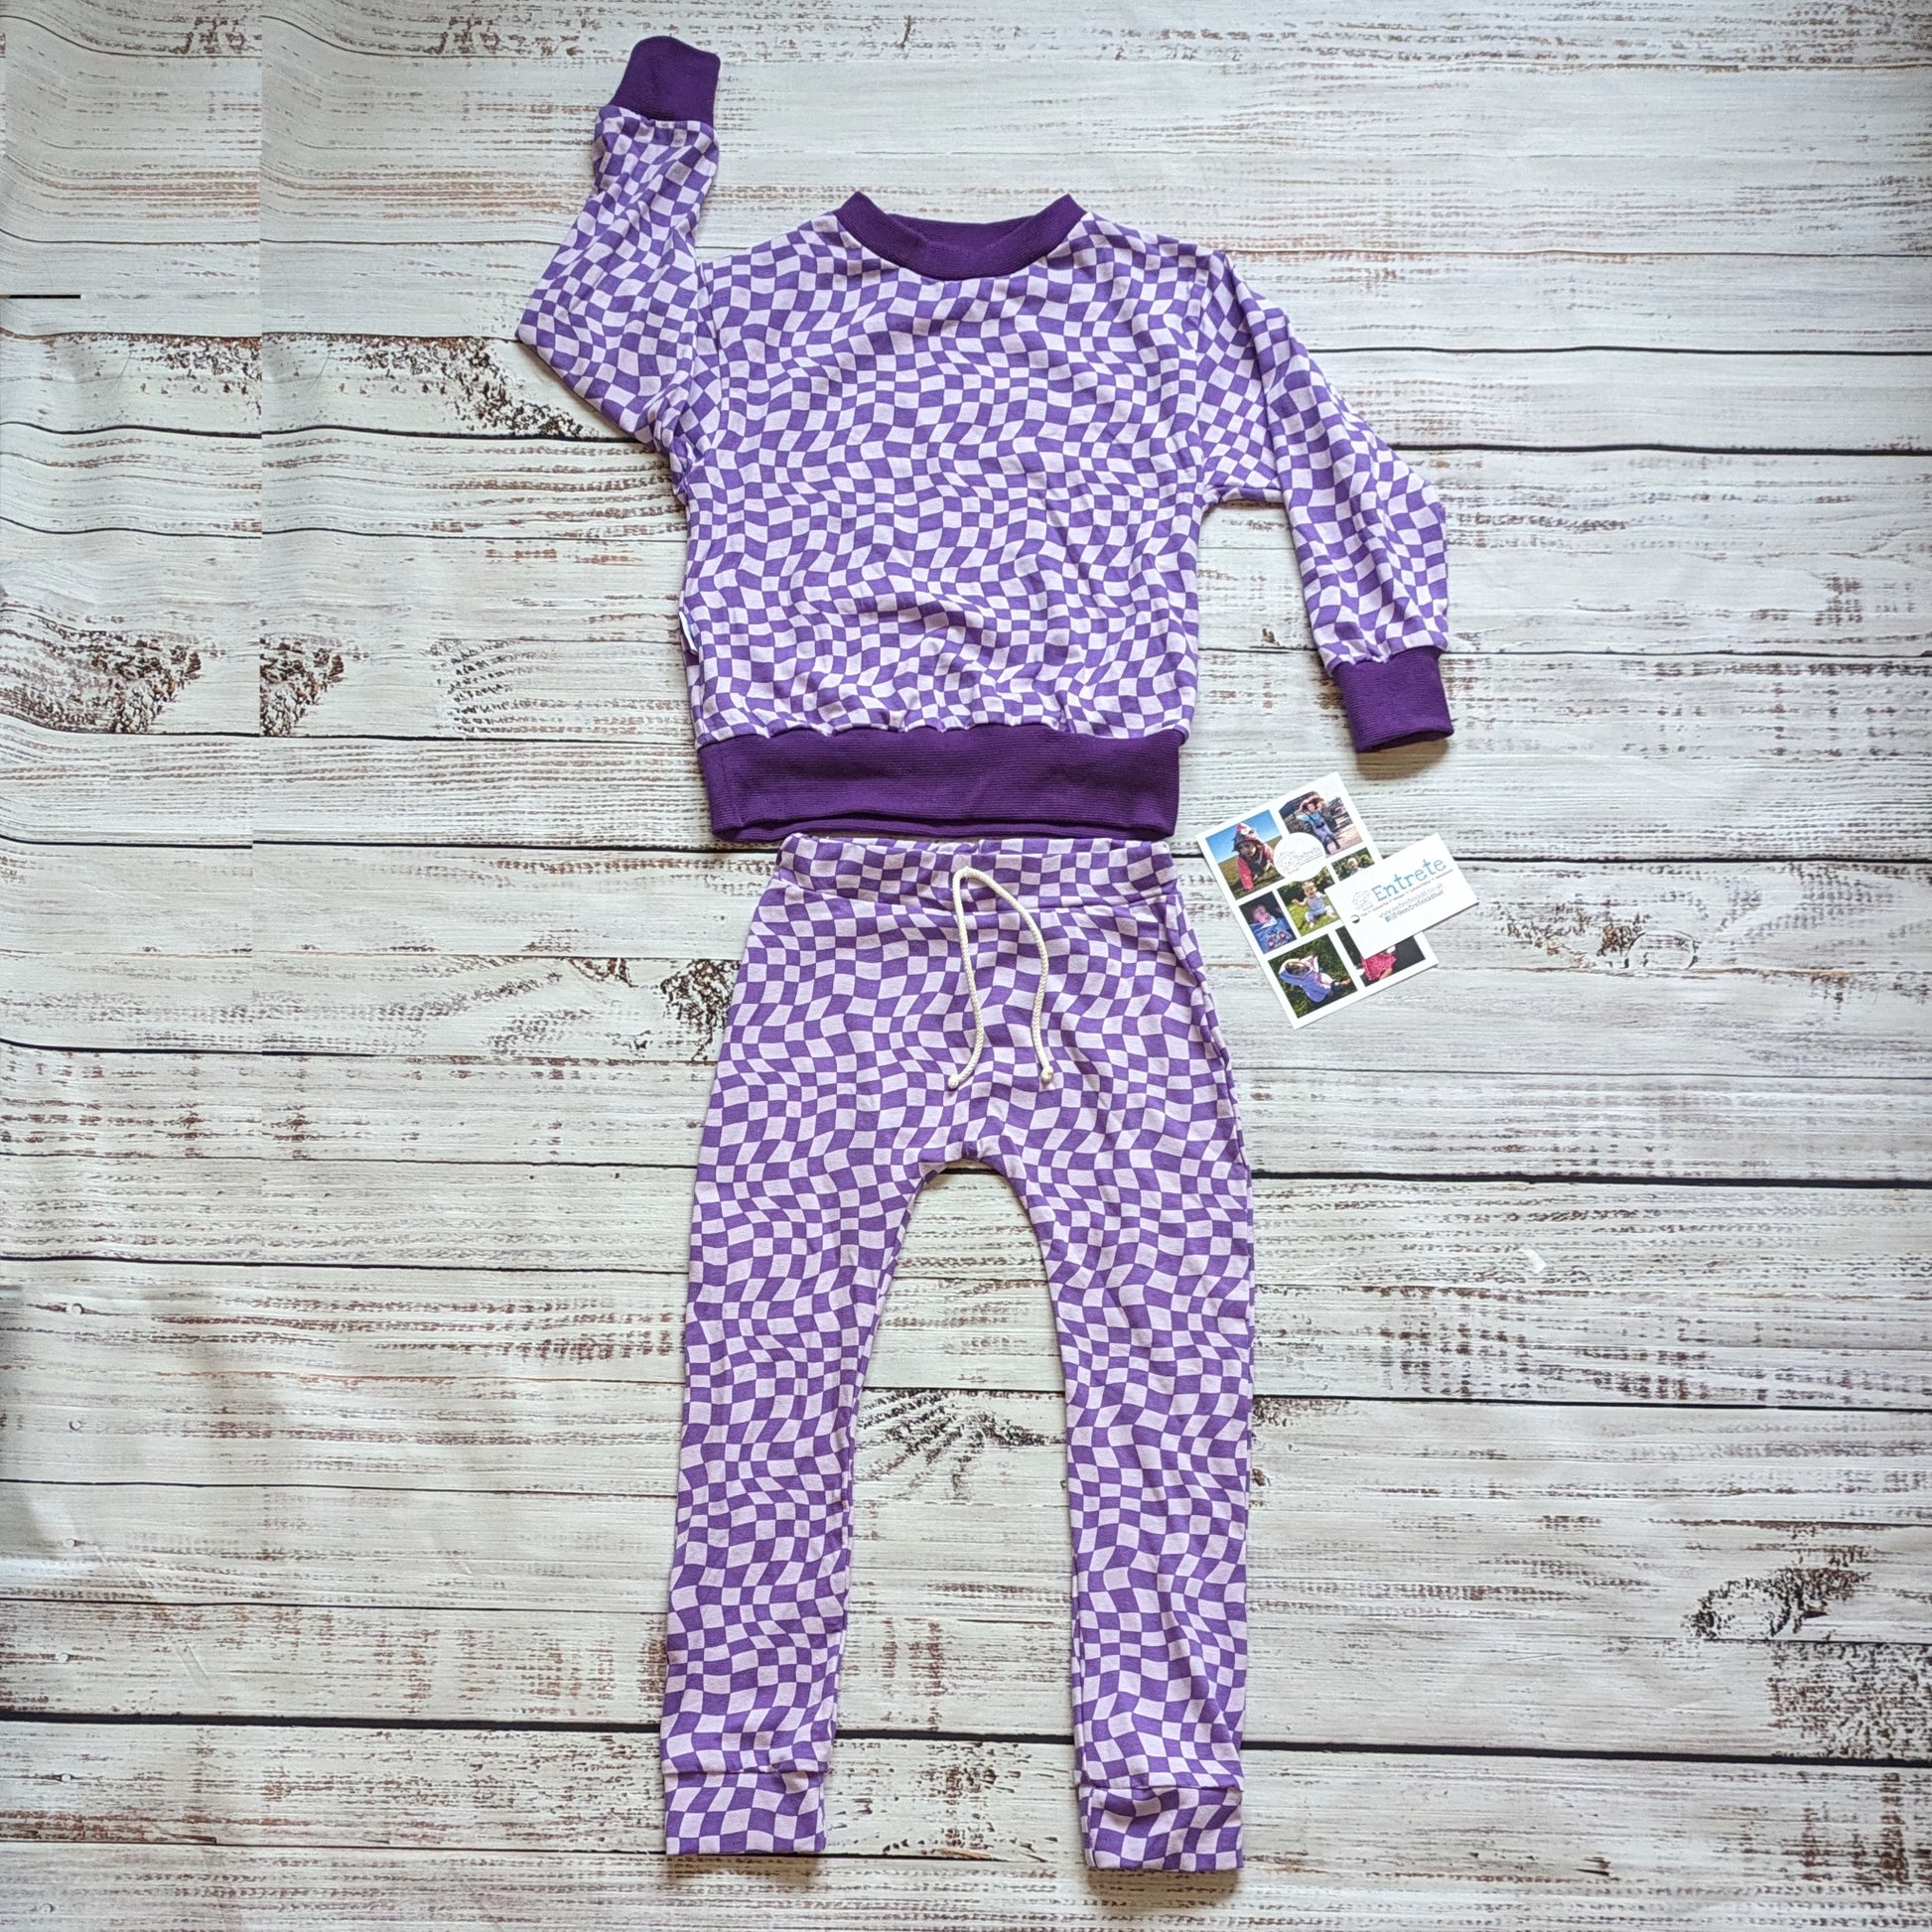 Warped purple trippy checked sweatshirt. Handmade using soft and comfy cotton jersey and cotton ribbing. Shown with a pair of purple trippy checked harem joggers.